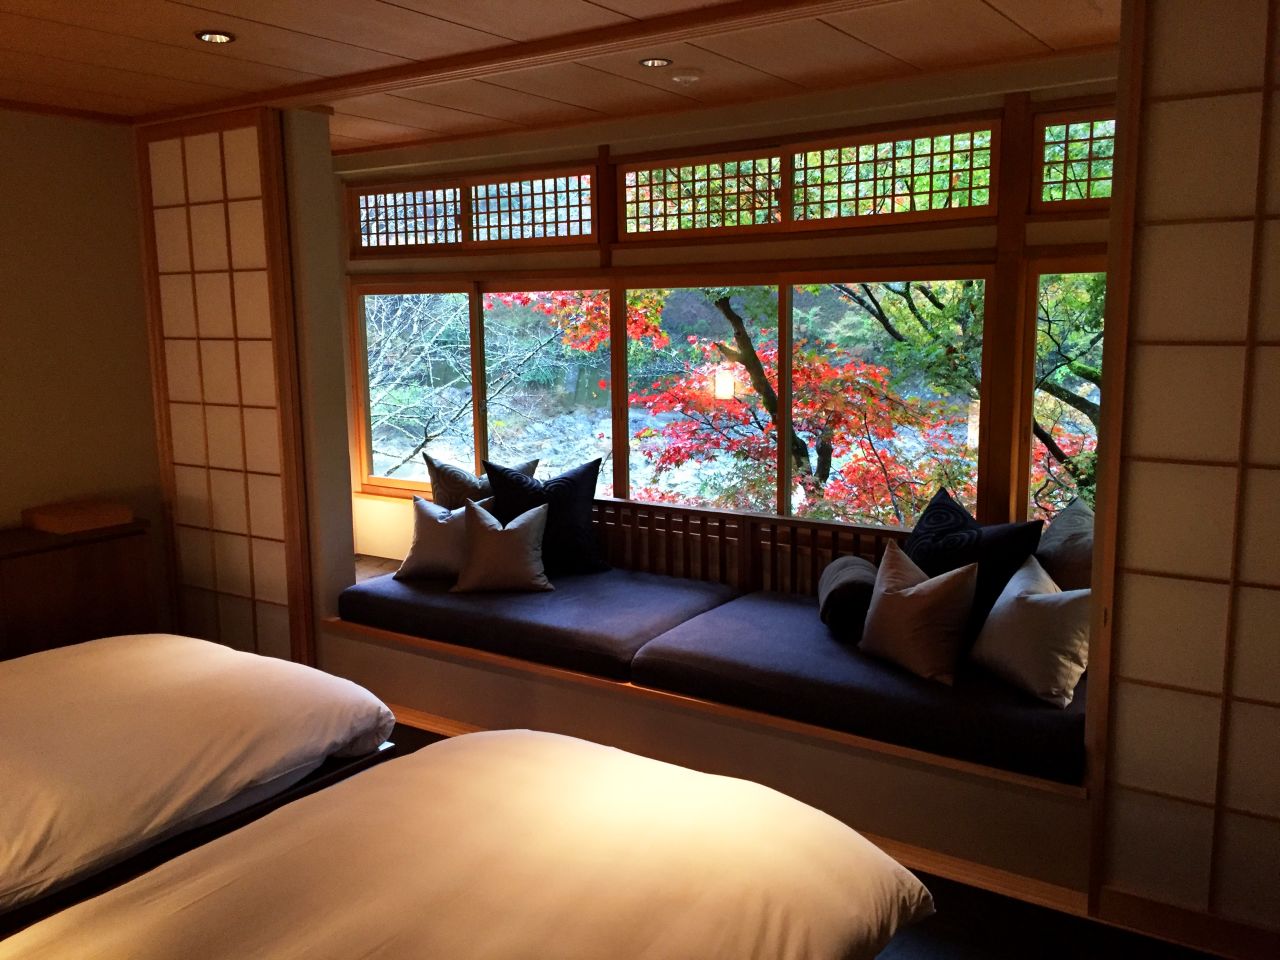 Every guest room features traditional "karakami" paper furnishings. These are created by Kyoto artisans using historic woodblock print patterns.